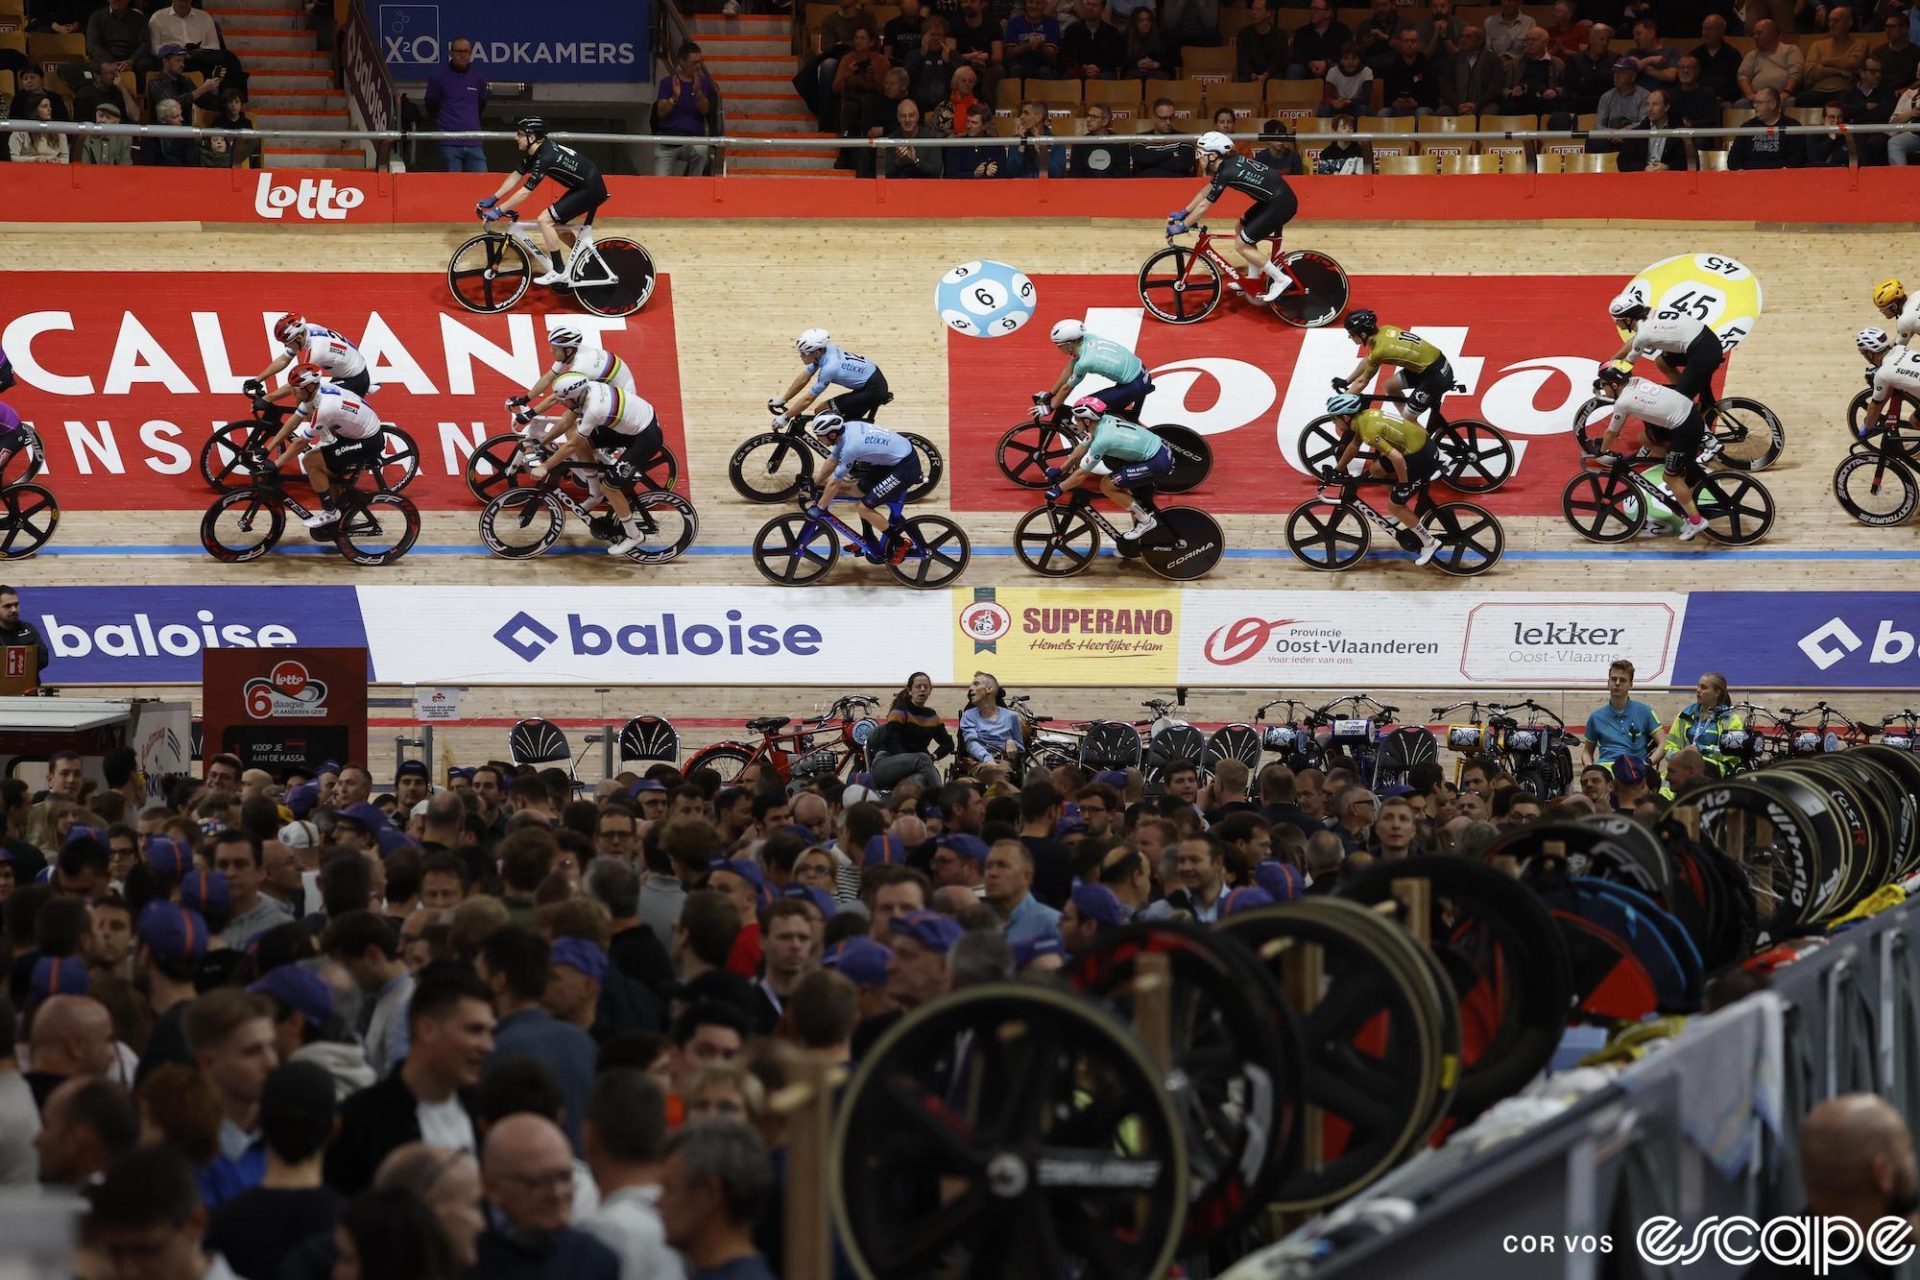 Track cyclists warm up in pairs before the start of a Madison round at the Gent Six Day.